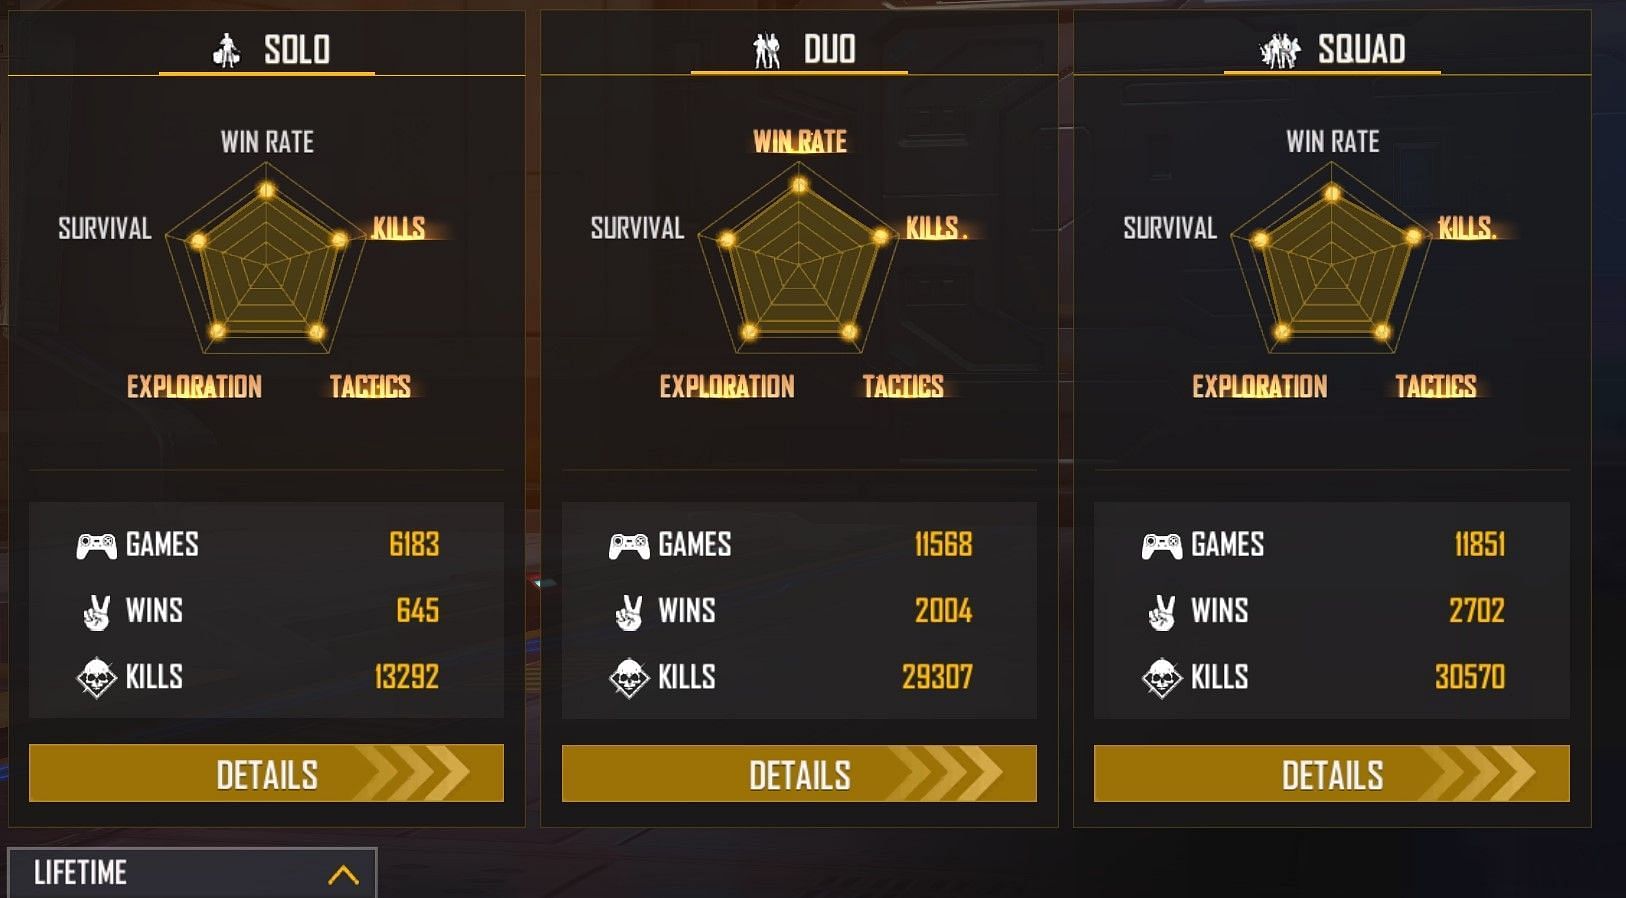 These are her lifetime stats in the game (Image via Garena)